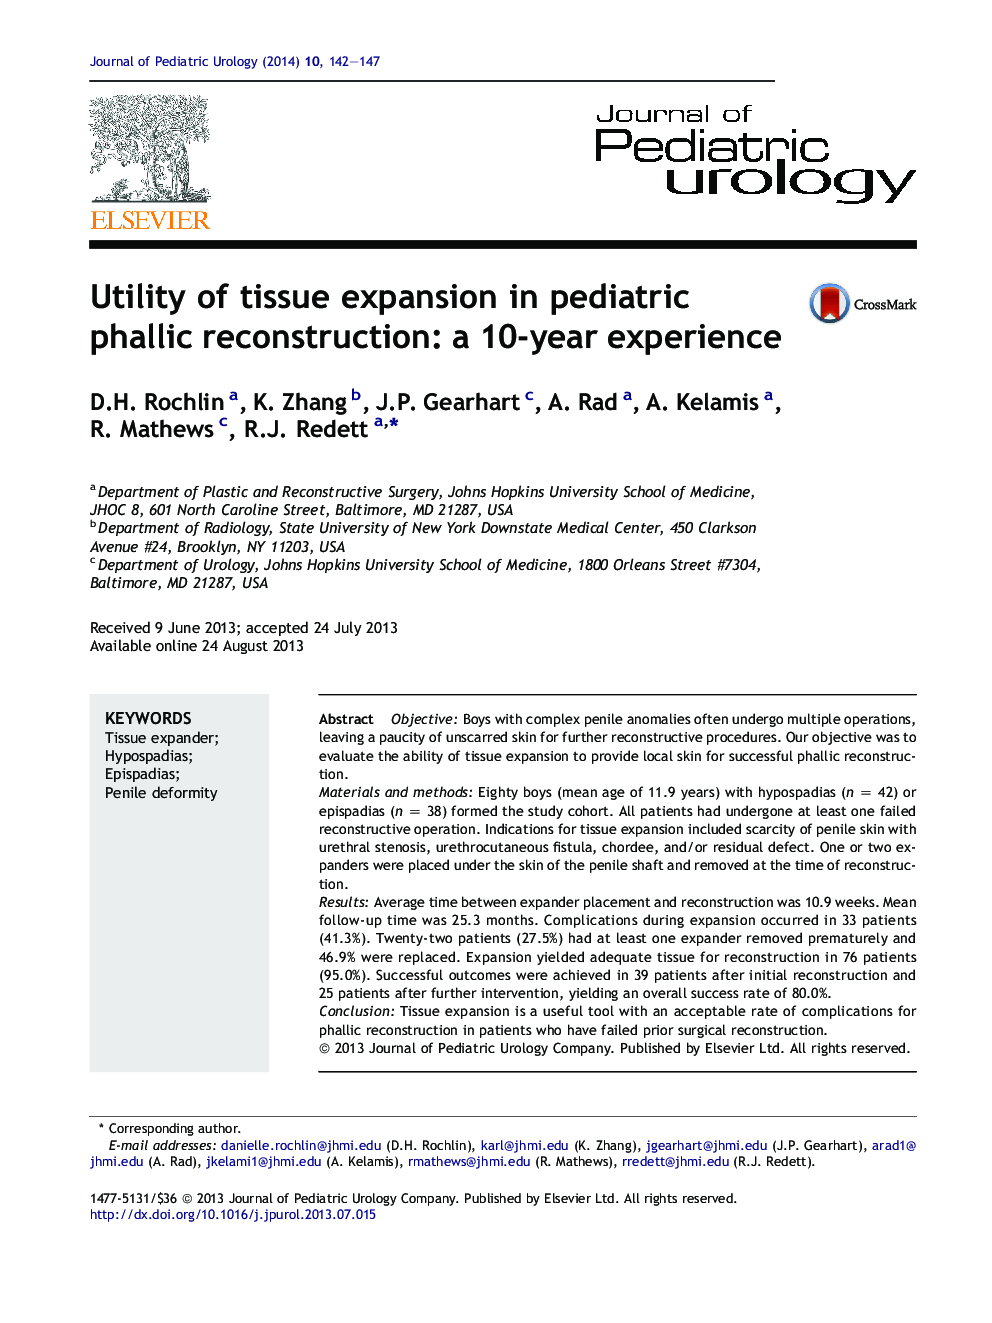 Utility of tissue expansion in pediatric phallic reconstruction: a 10-year experience